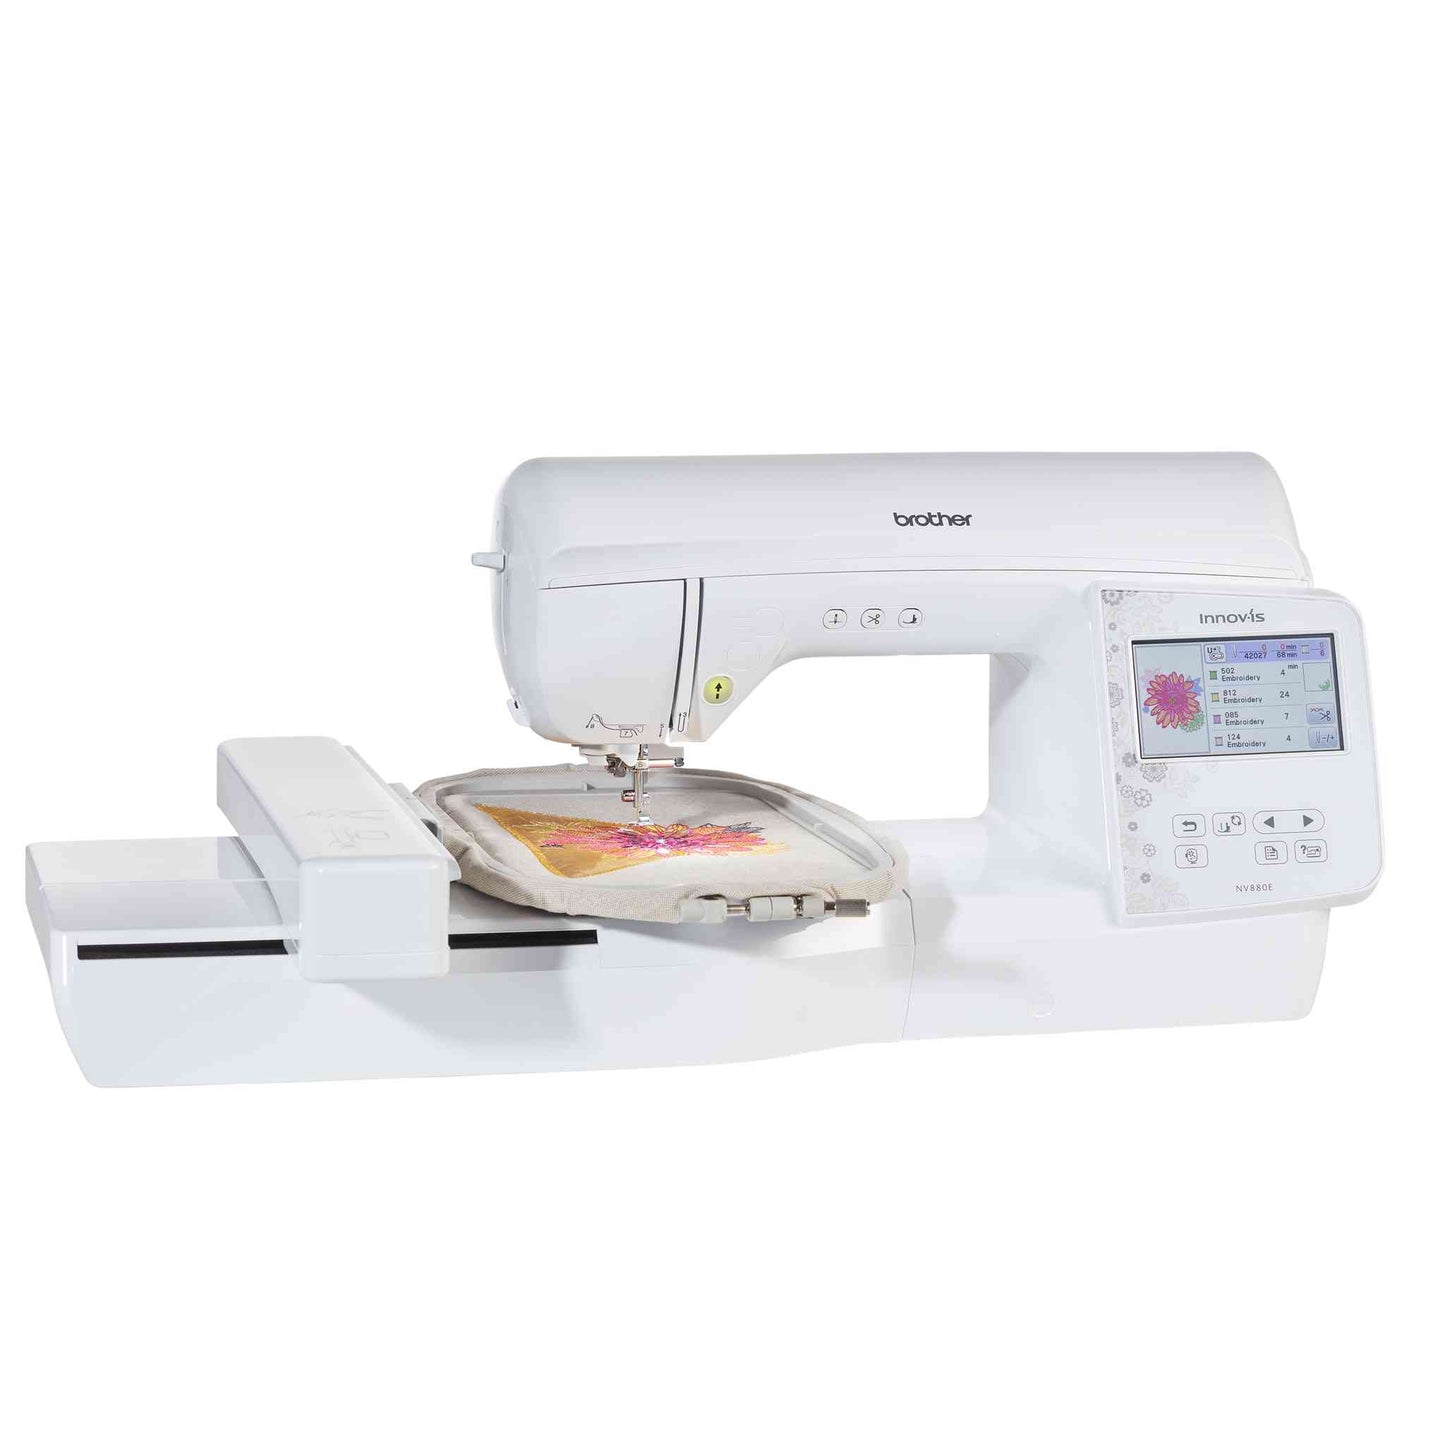 brother nv880e sewing and embroidery machine with hoop attached and floral design stitch out